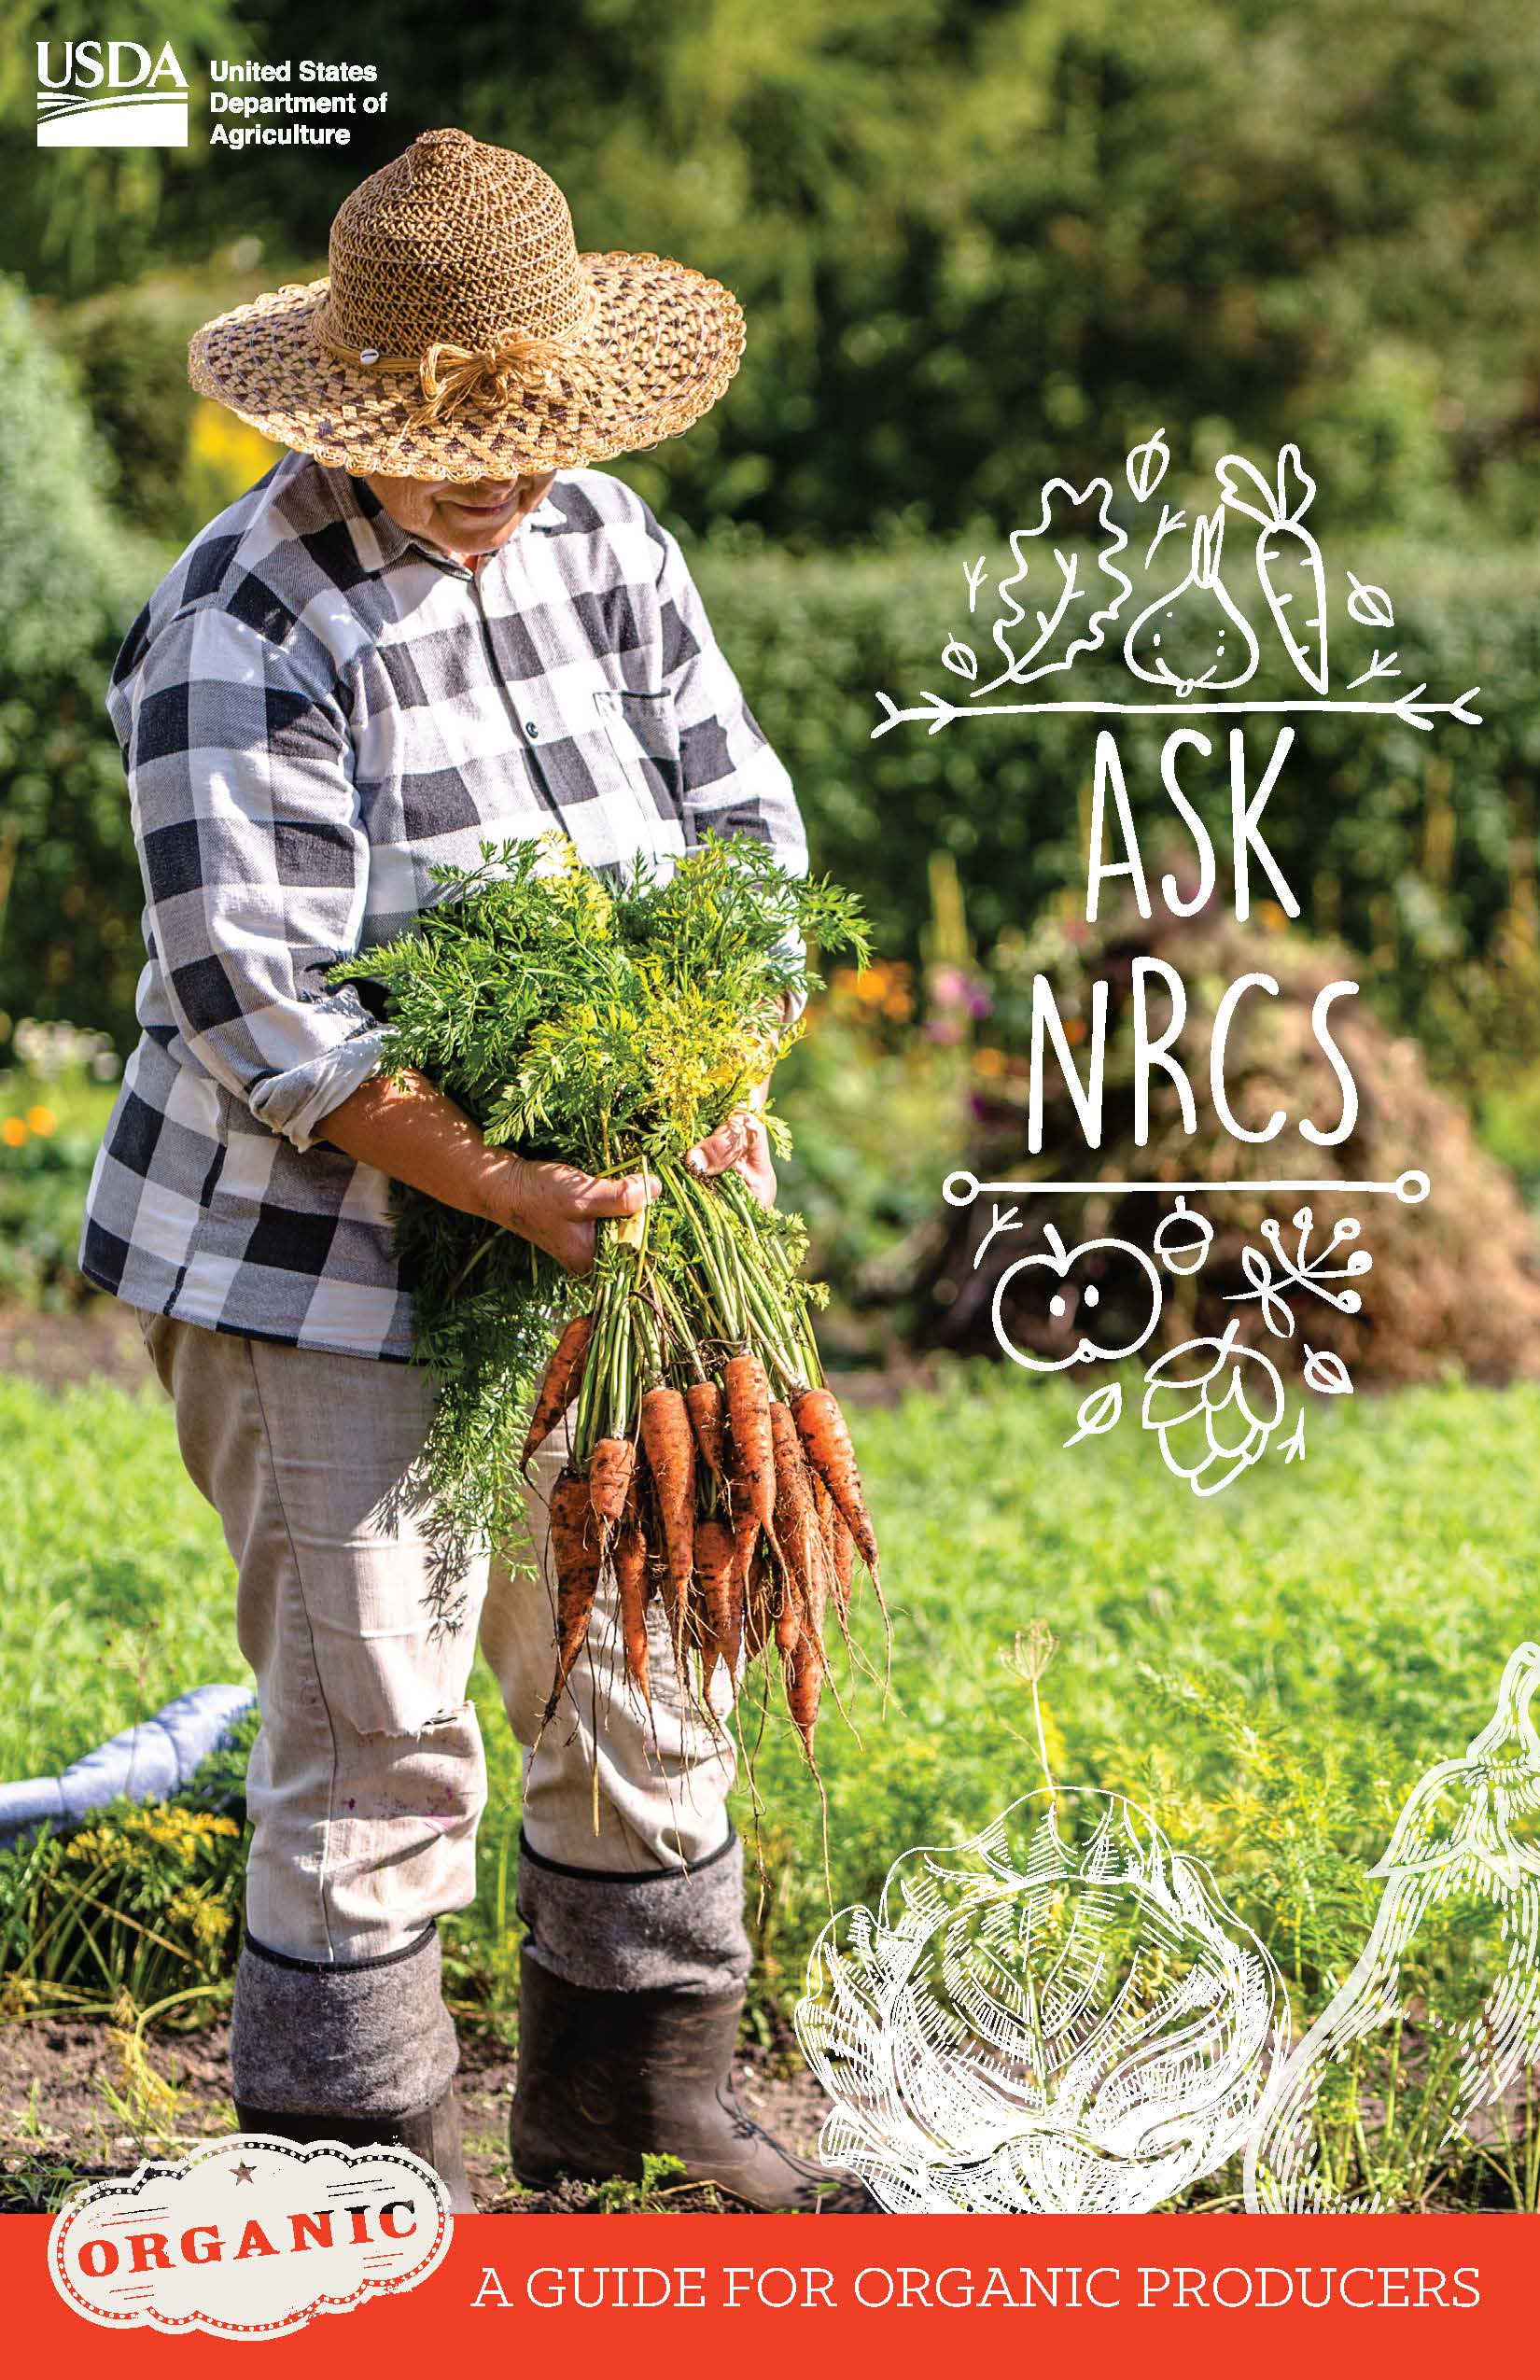 Ask NRCS-A Guide for Organic Producers